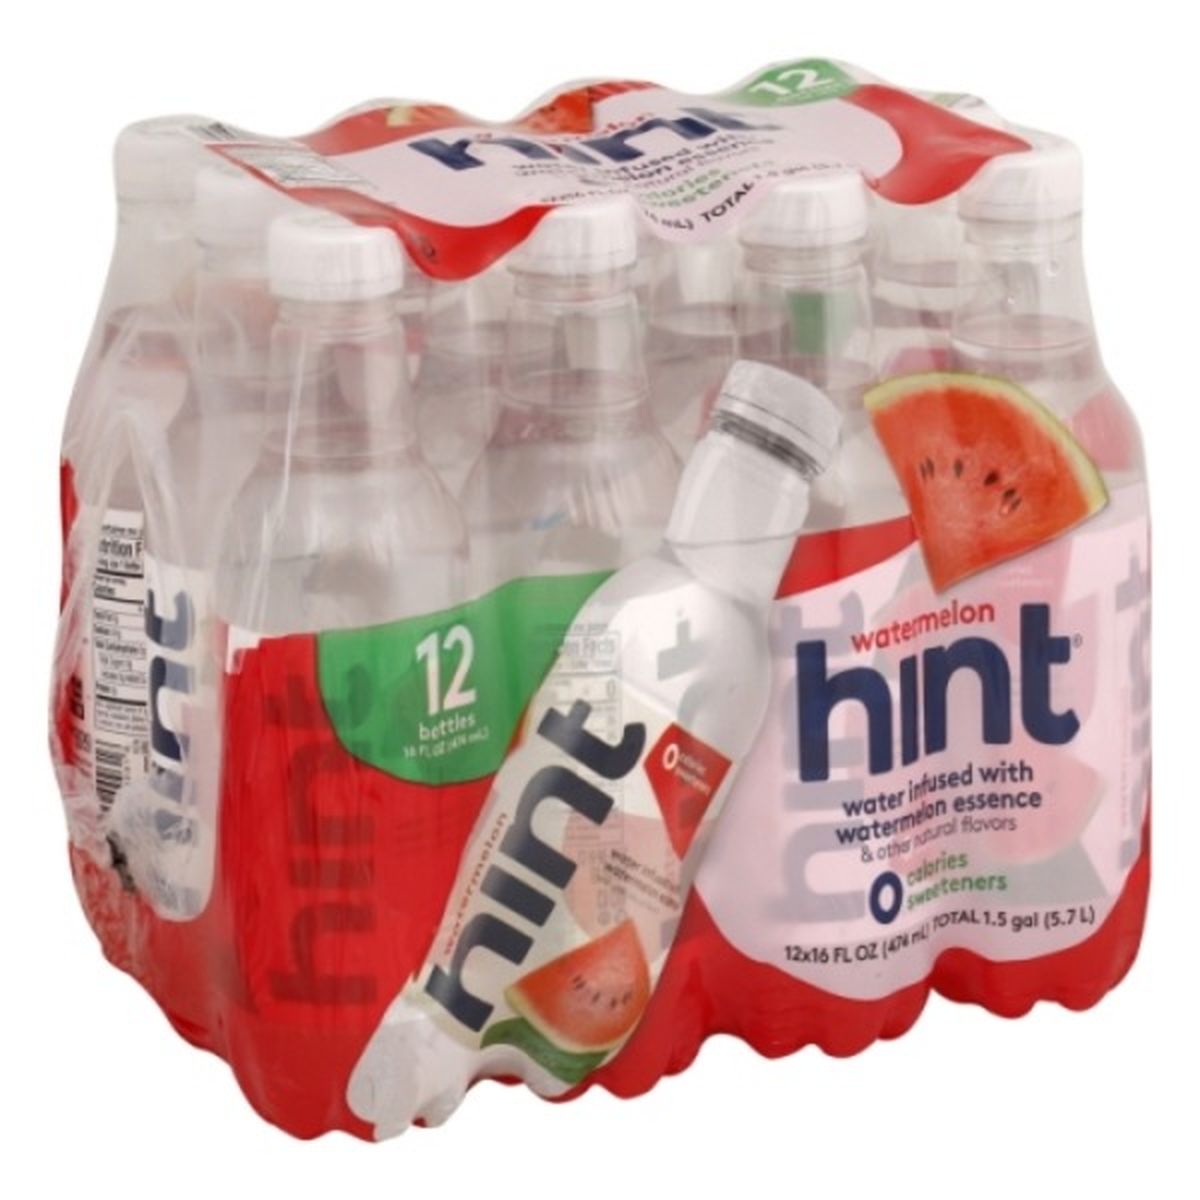 Calories in hint Water, Watermelon